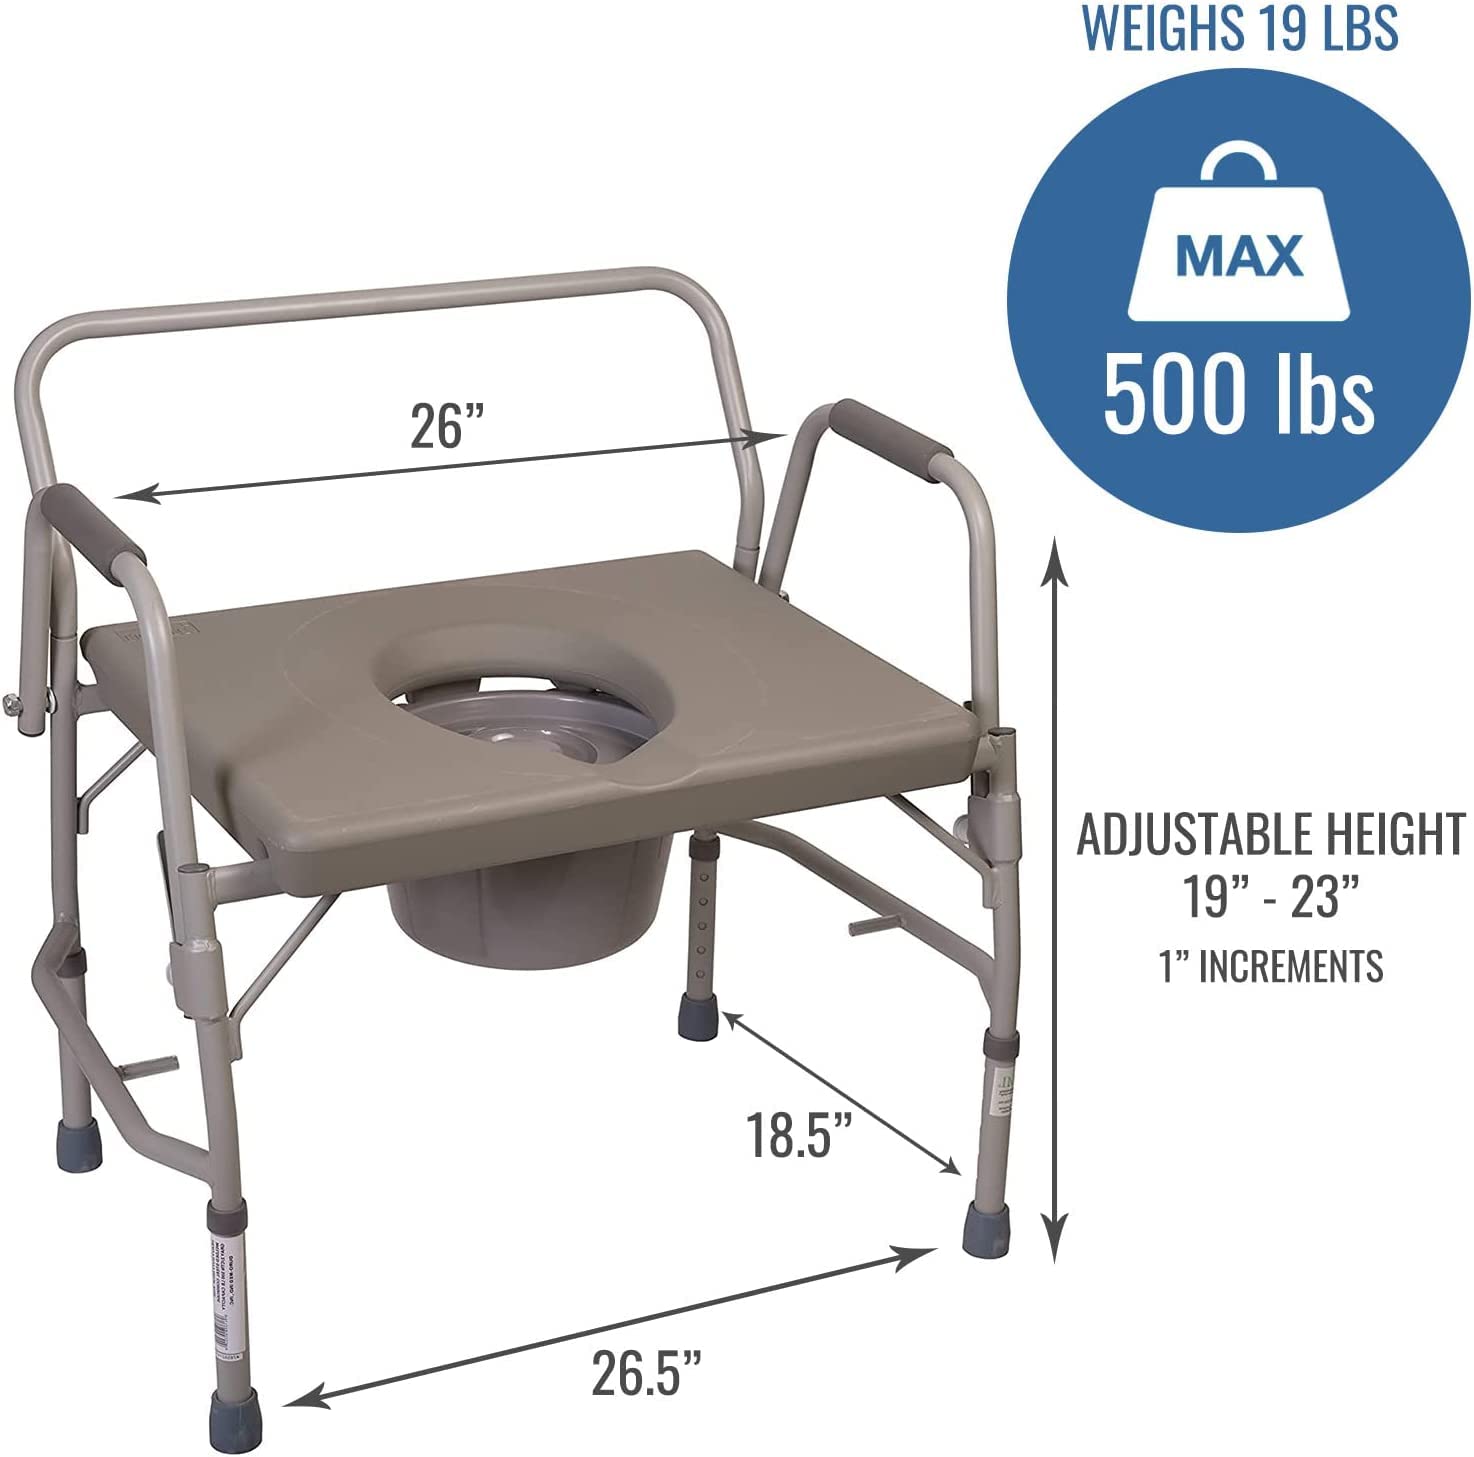 DMI Bedside Commode, Extra Wide Commode Chair, Bedside Toilet, Raised Toilet Seat with Handles, Holds up to 500 Pounds with Included 7 qt Commode Bucket, Adjustable from 19-23 Inches